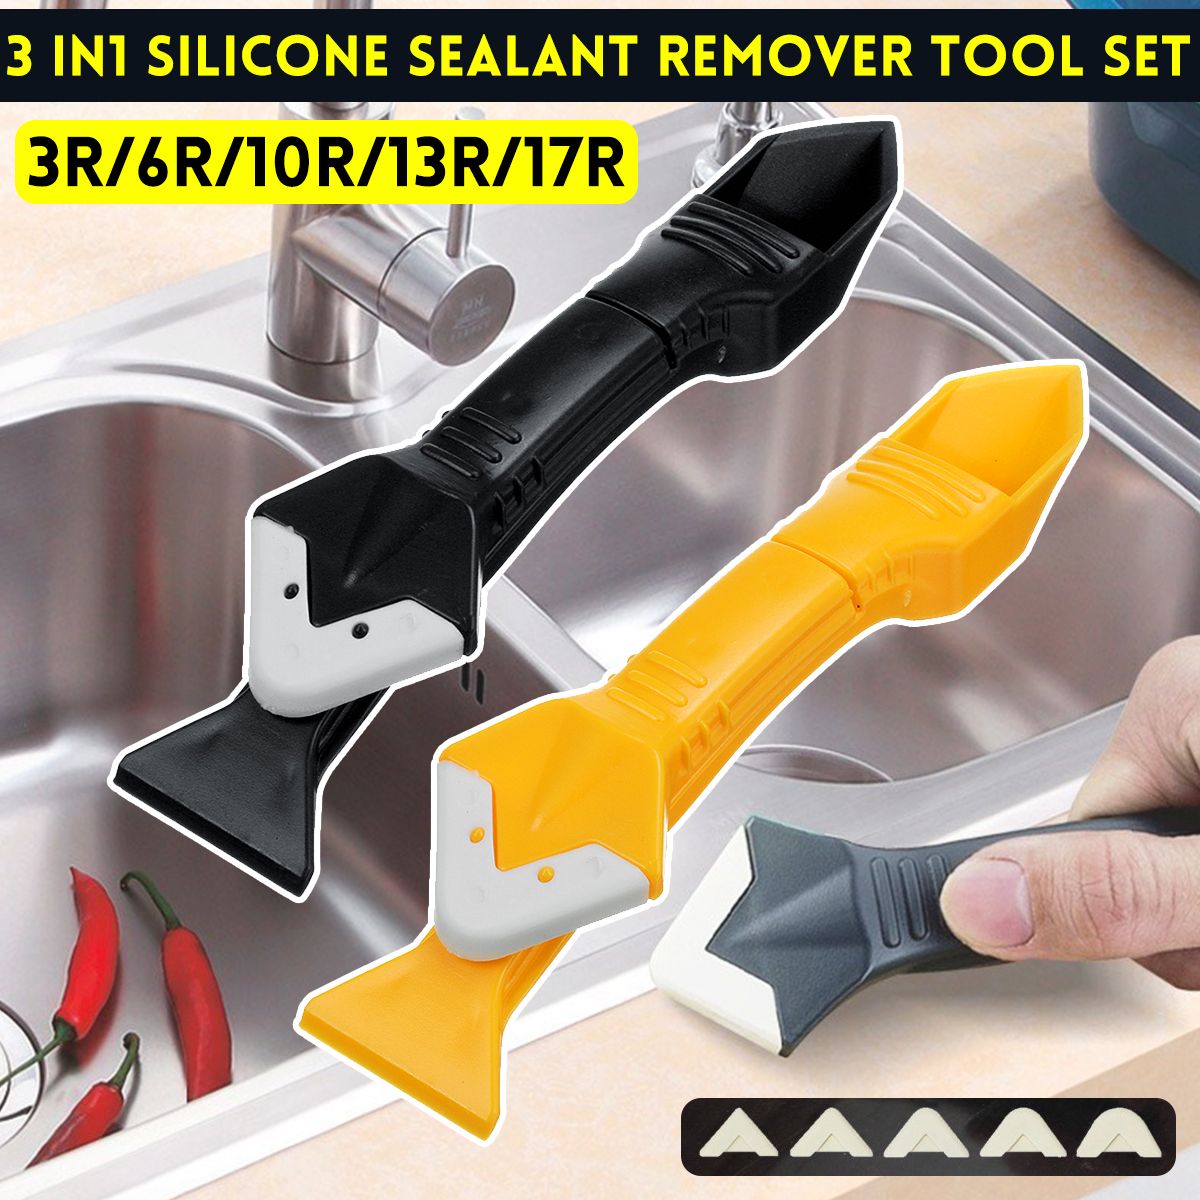 3-In1-Silicone-Sealant-Remover-Tool-Set-Scrapers-Caulking-Mould-1644987